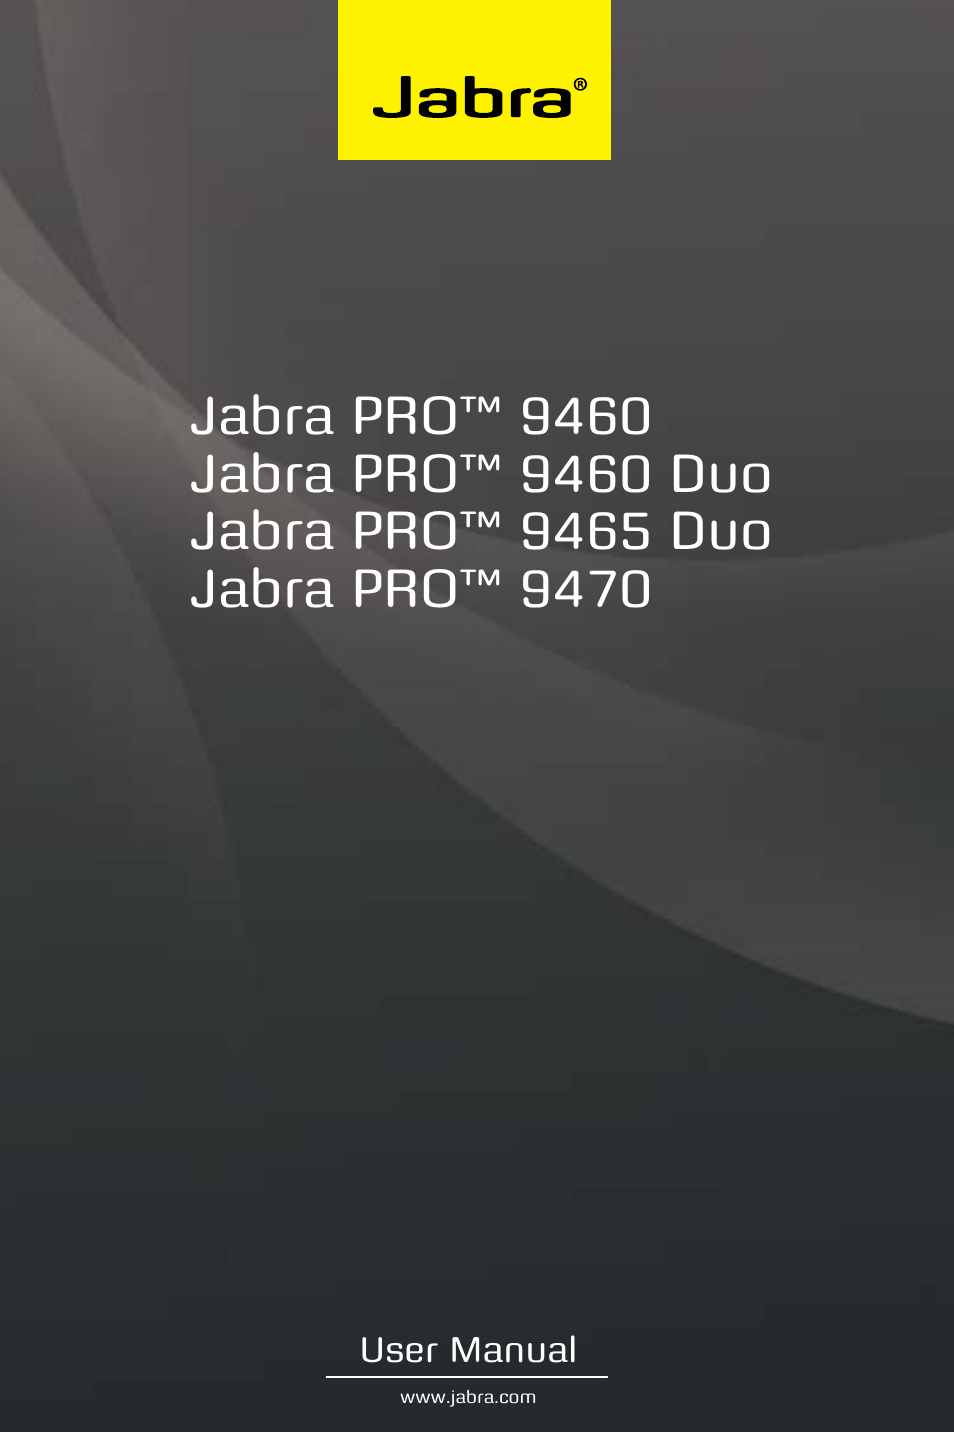 Jabra PRO 9470 User Manual User Manual | 41 pages | Also for: PRO 9465 Duo  User Manual, PRO 9460 Duo User Manual, PRO 9460 User Manual